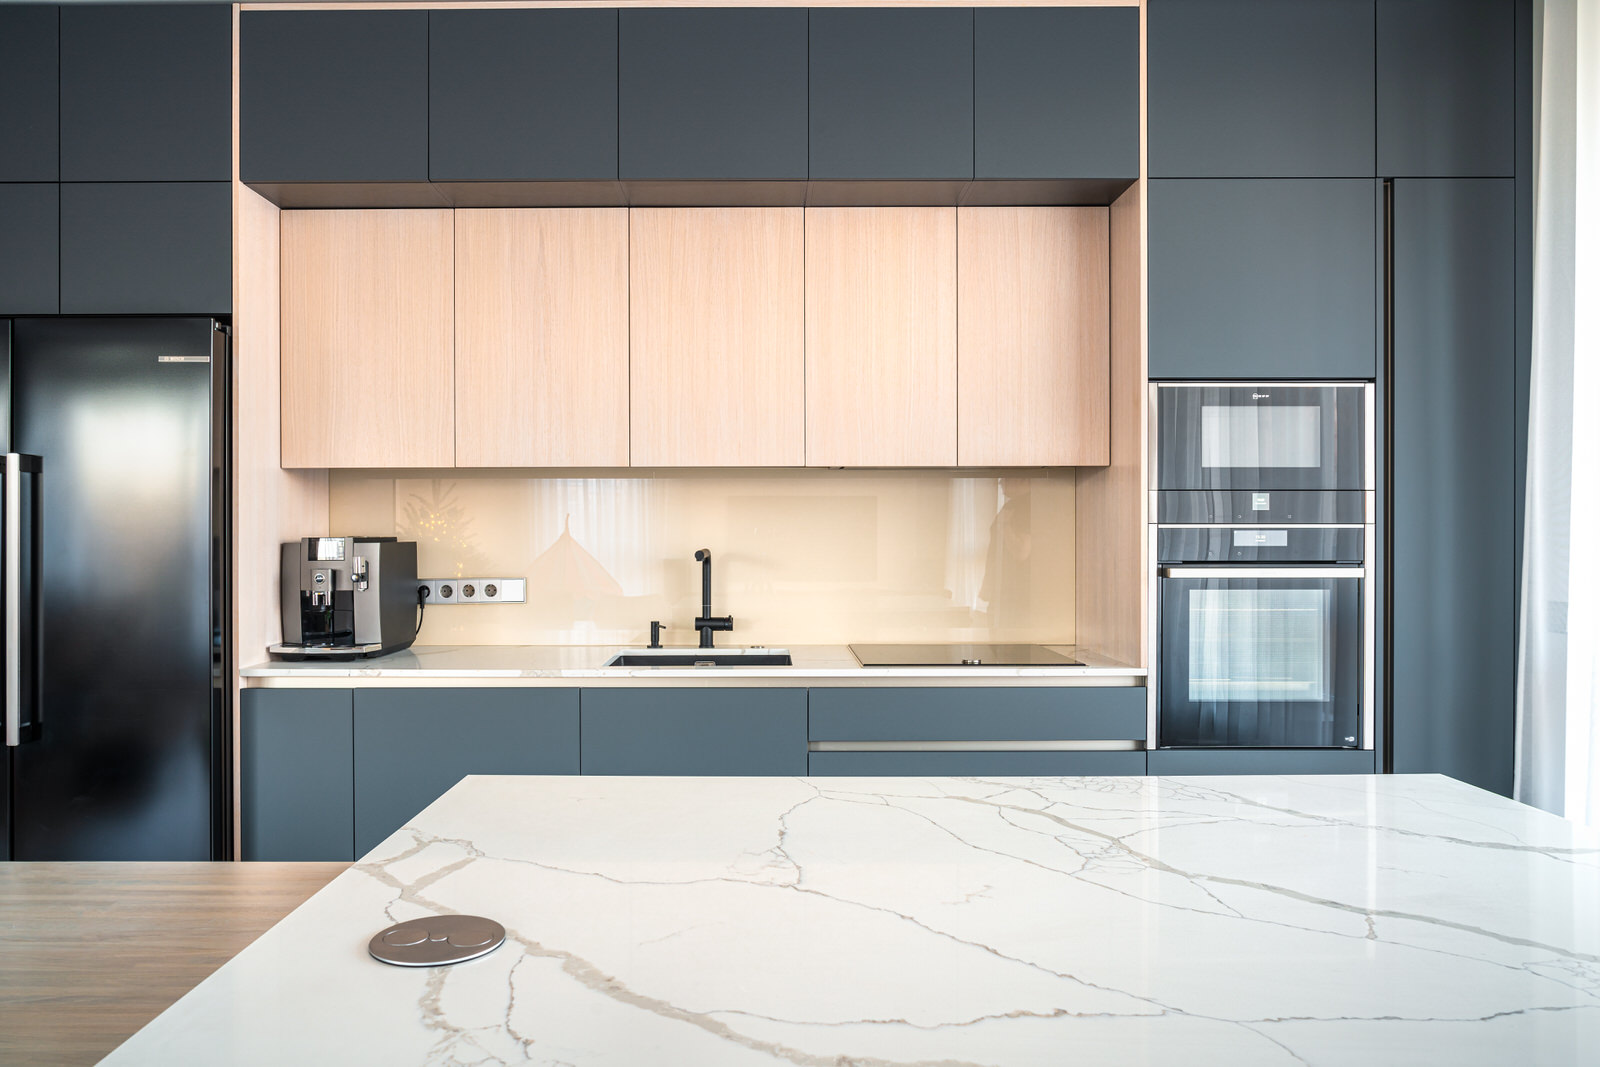 Two-level kitchen cabinets for extra storage and efficient use of space